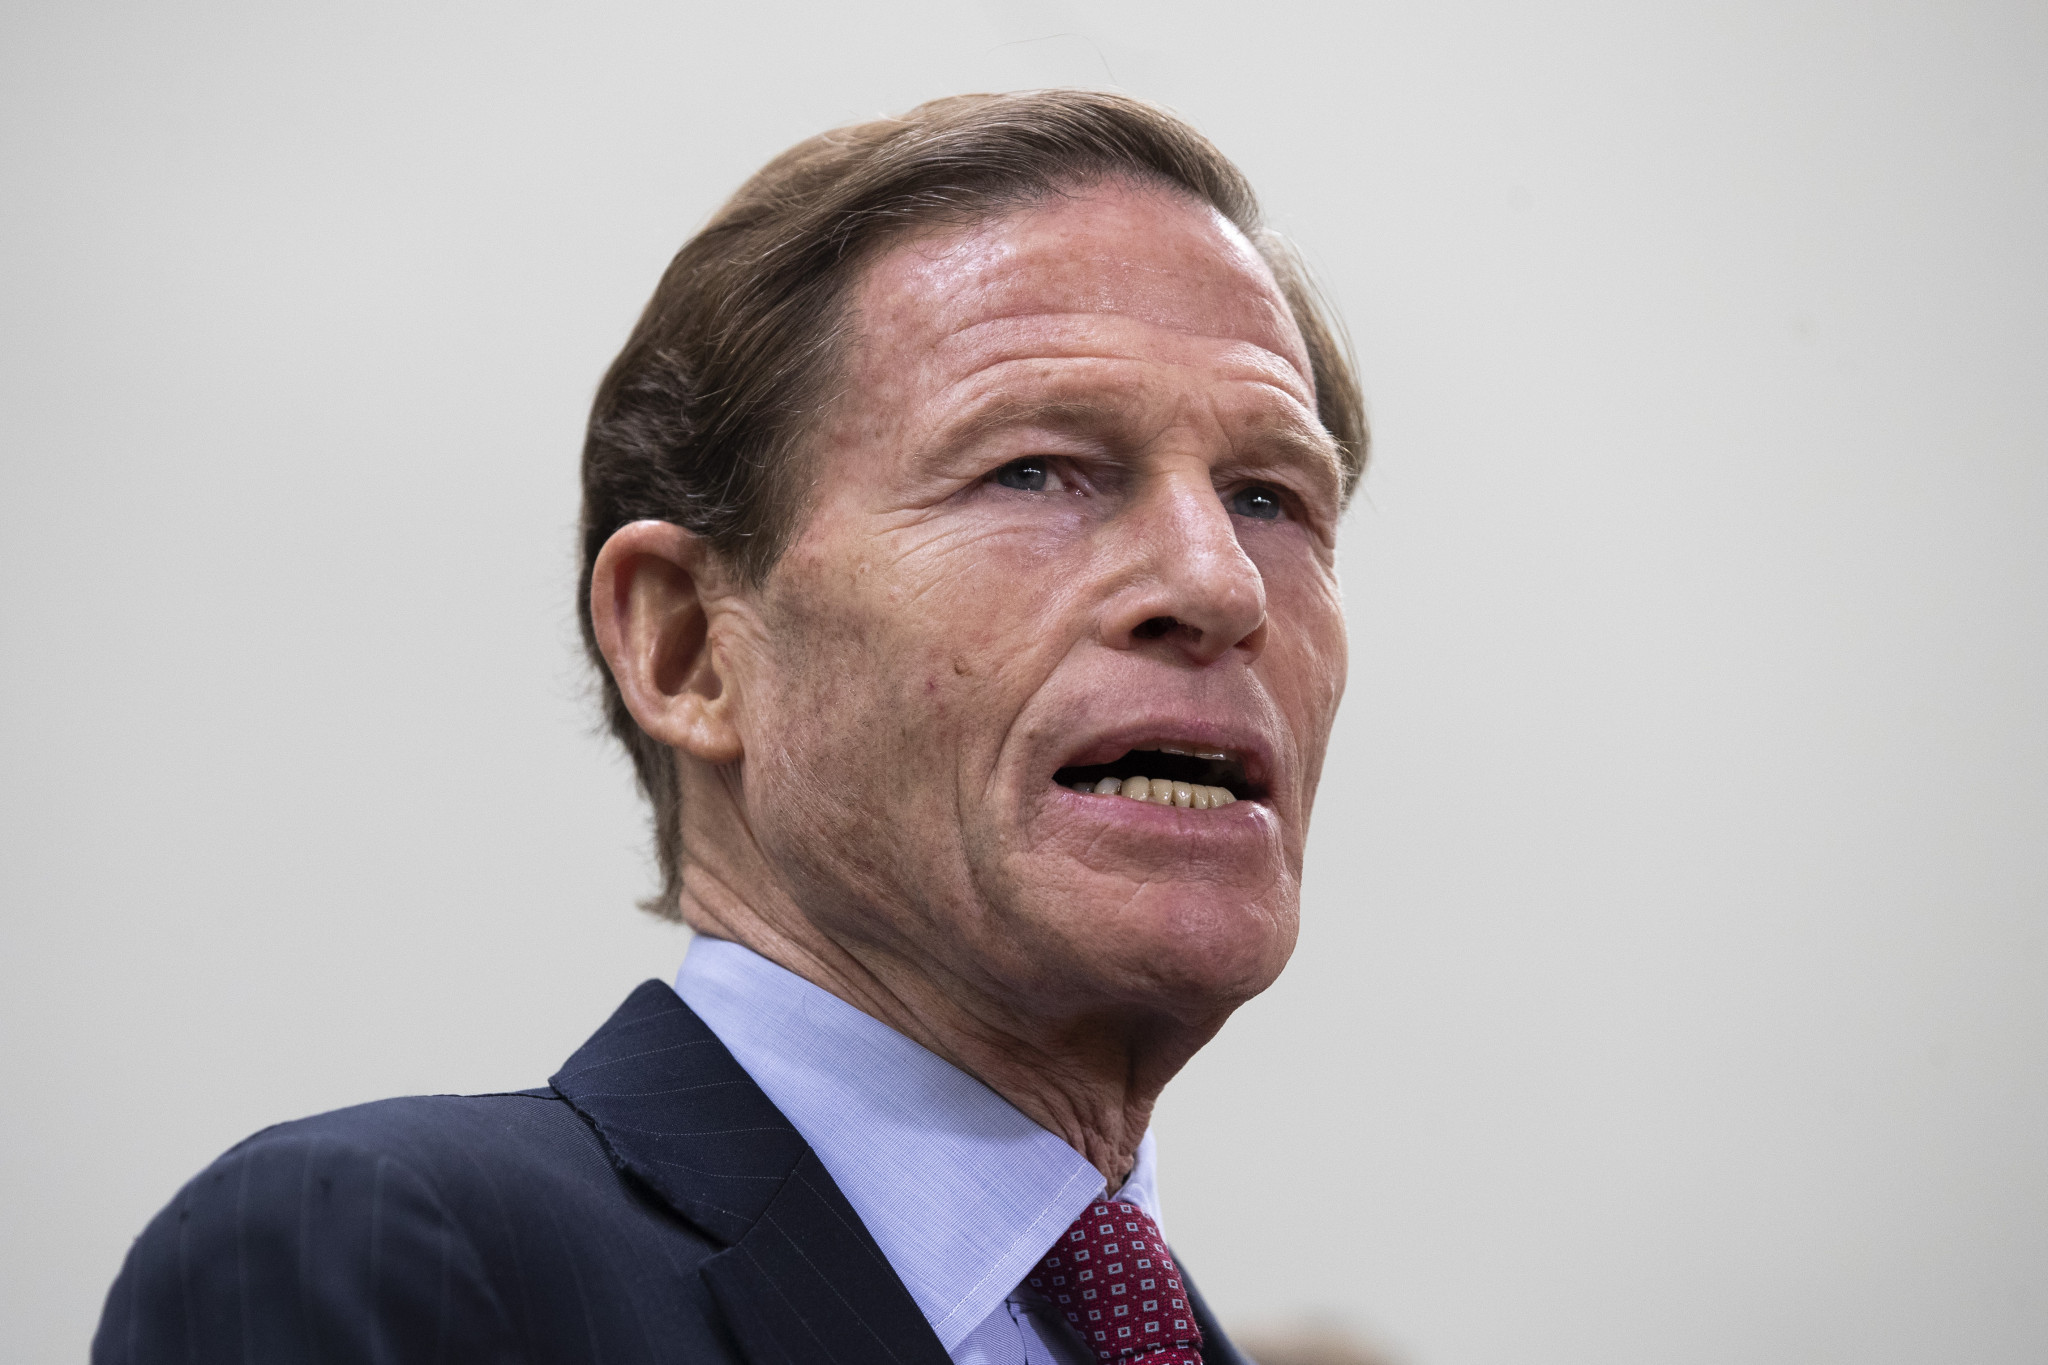 American Senator Richard Blumenthal has called on the FBI to investigate USOC and USA Gymnastics following the sex abuse scandal ©Getty Images